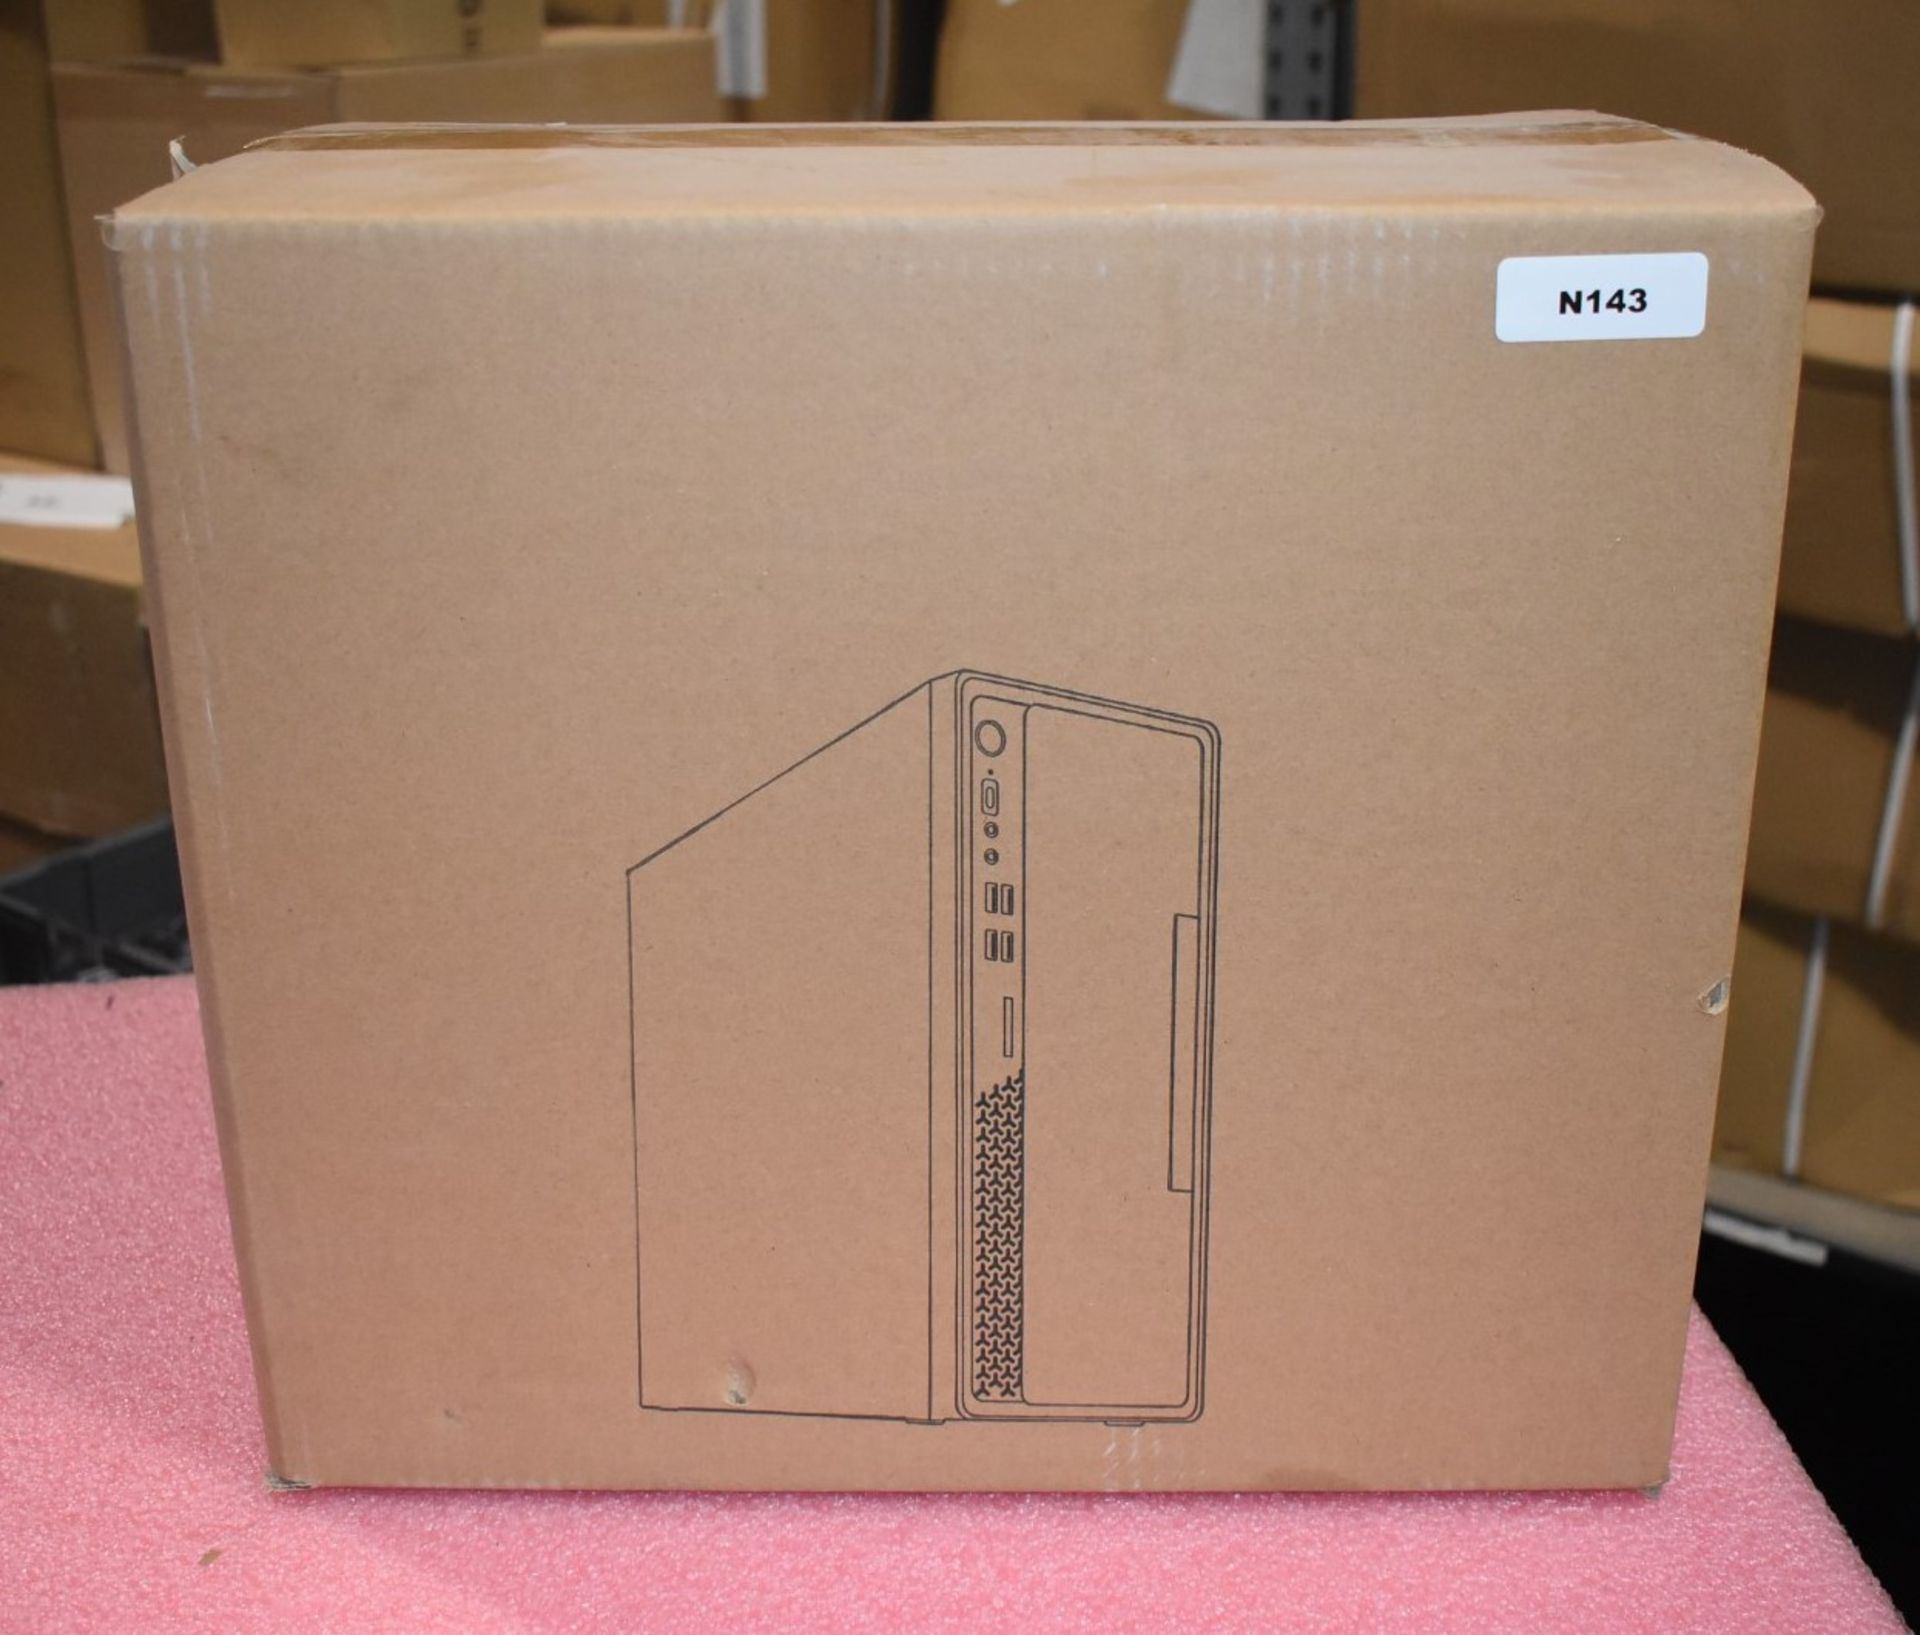 1 x CIT SI001BK Slim Micro ATX SFF PC Case With Type C Port - New Boxed Stock - Image 4 of 4